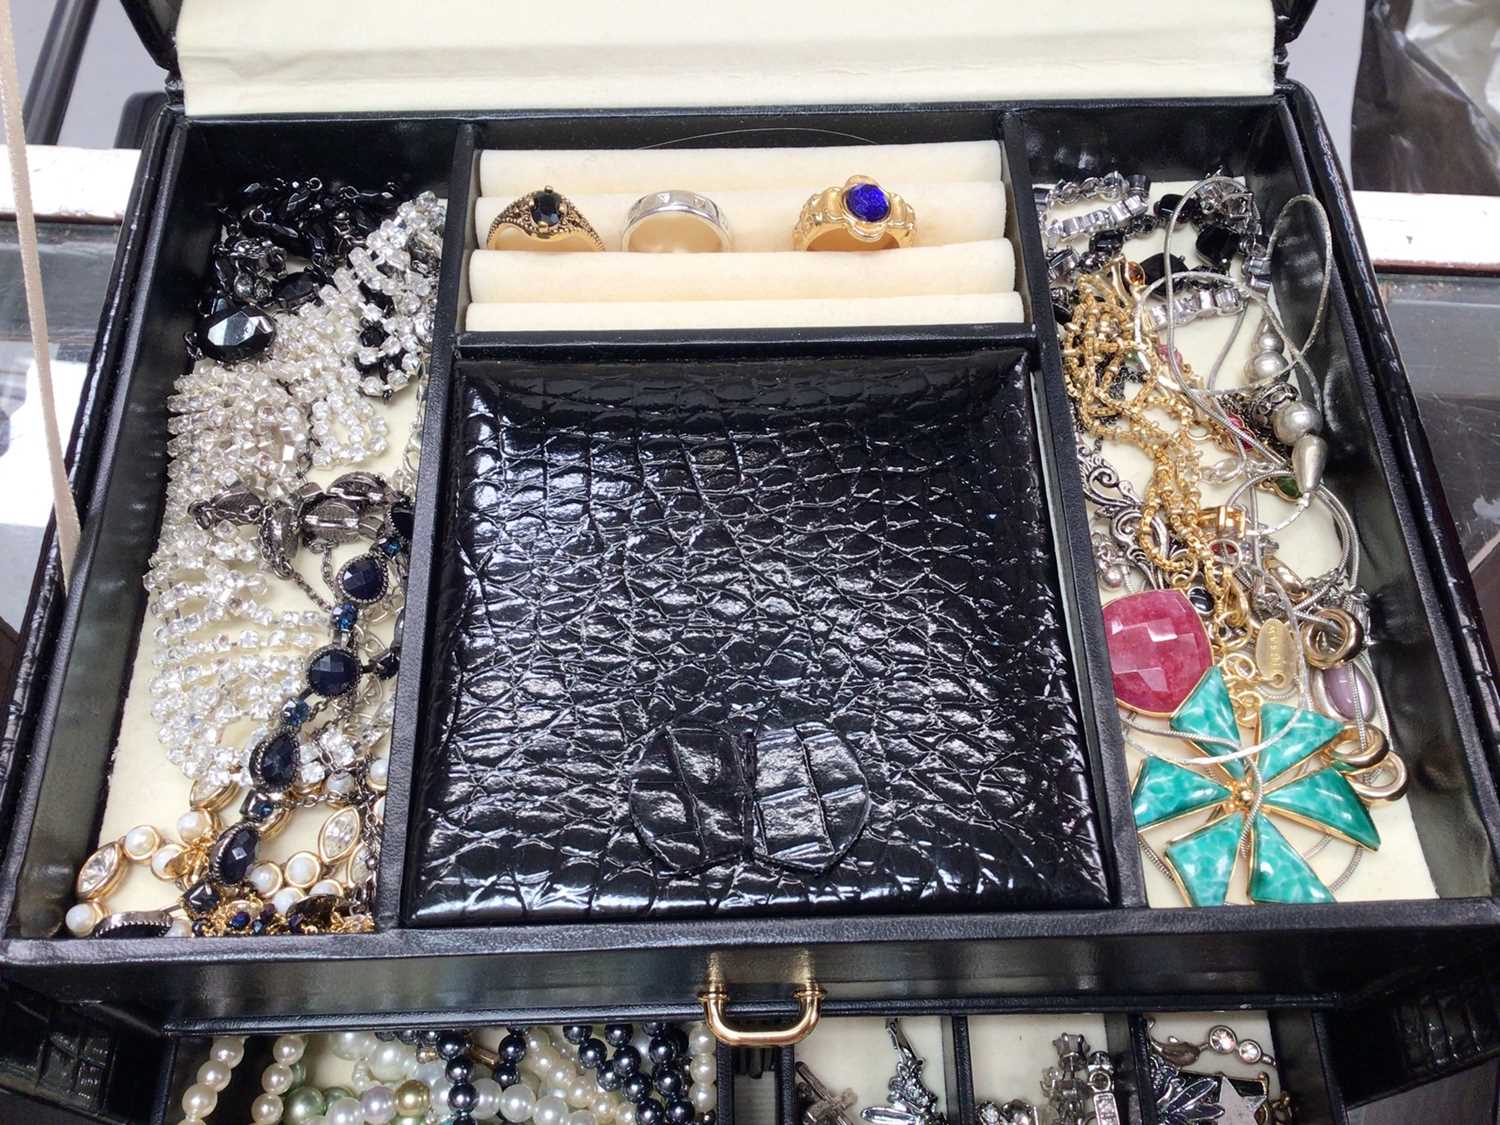 Three jewellery boxes containing costume jewellery including various bead necklaces, pendants, rings - Image 3 of 7